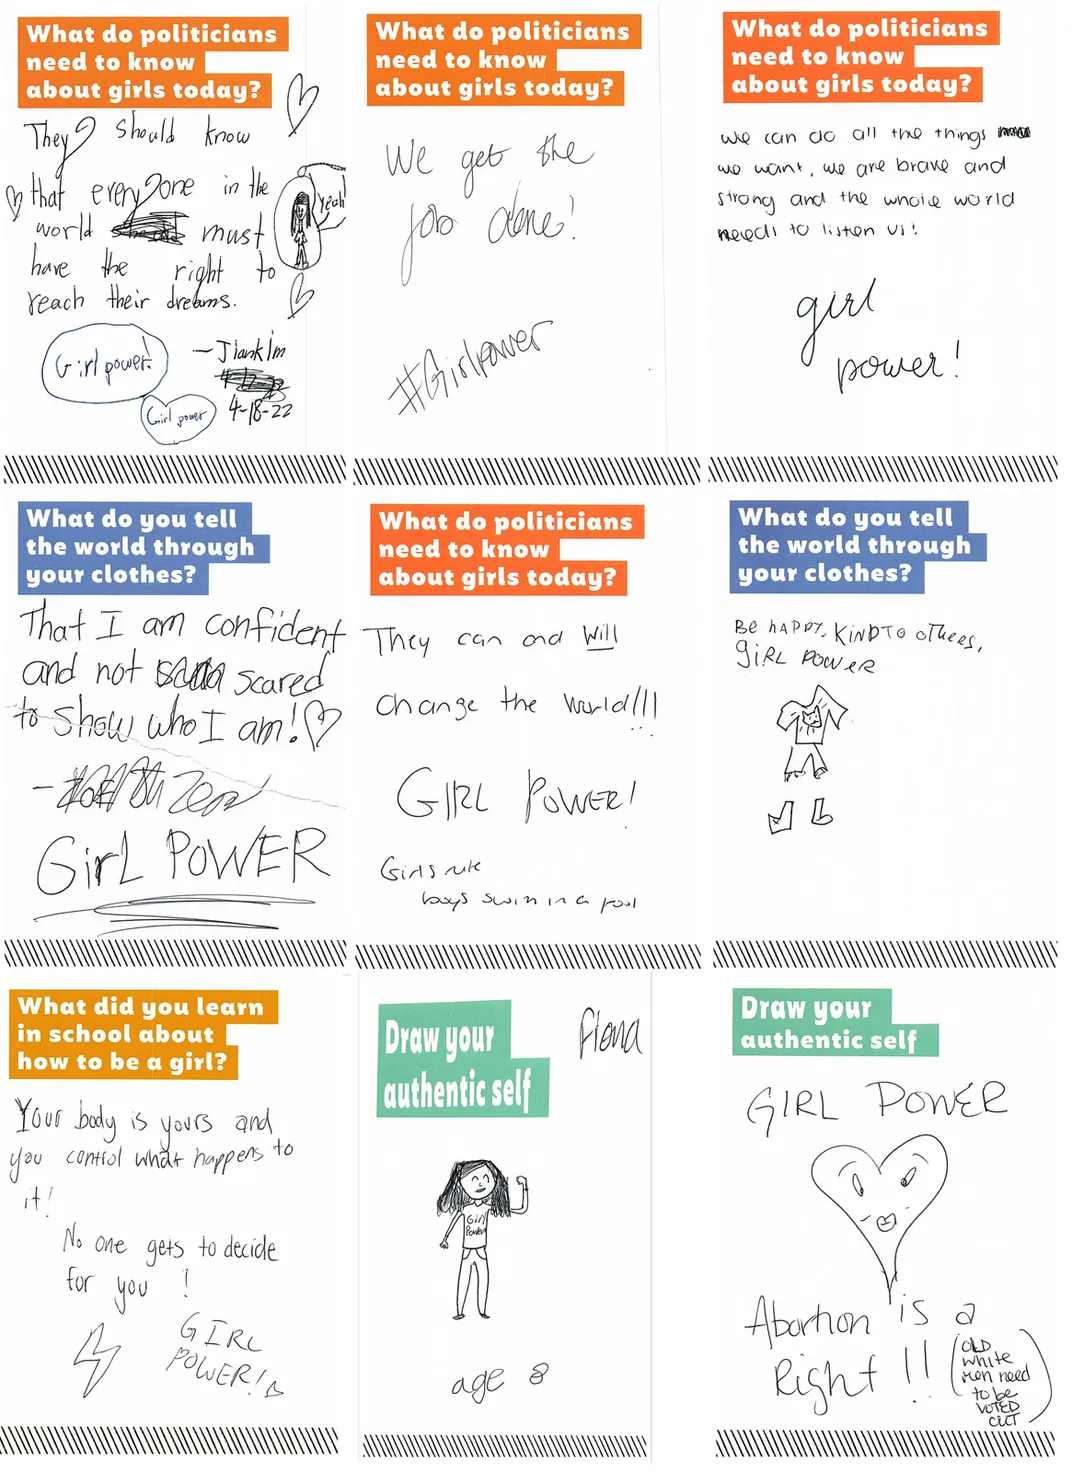 Nine cards with visitor messages. One visitor responds to the prompt "What do politicians need to know about girls today" with a message that includes "They can and will change the world!"